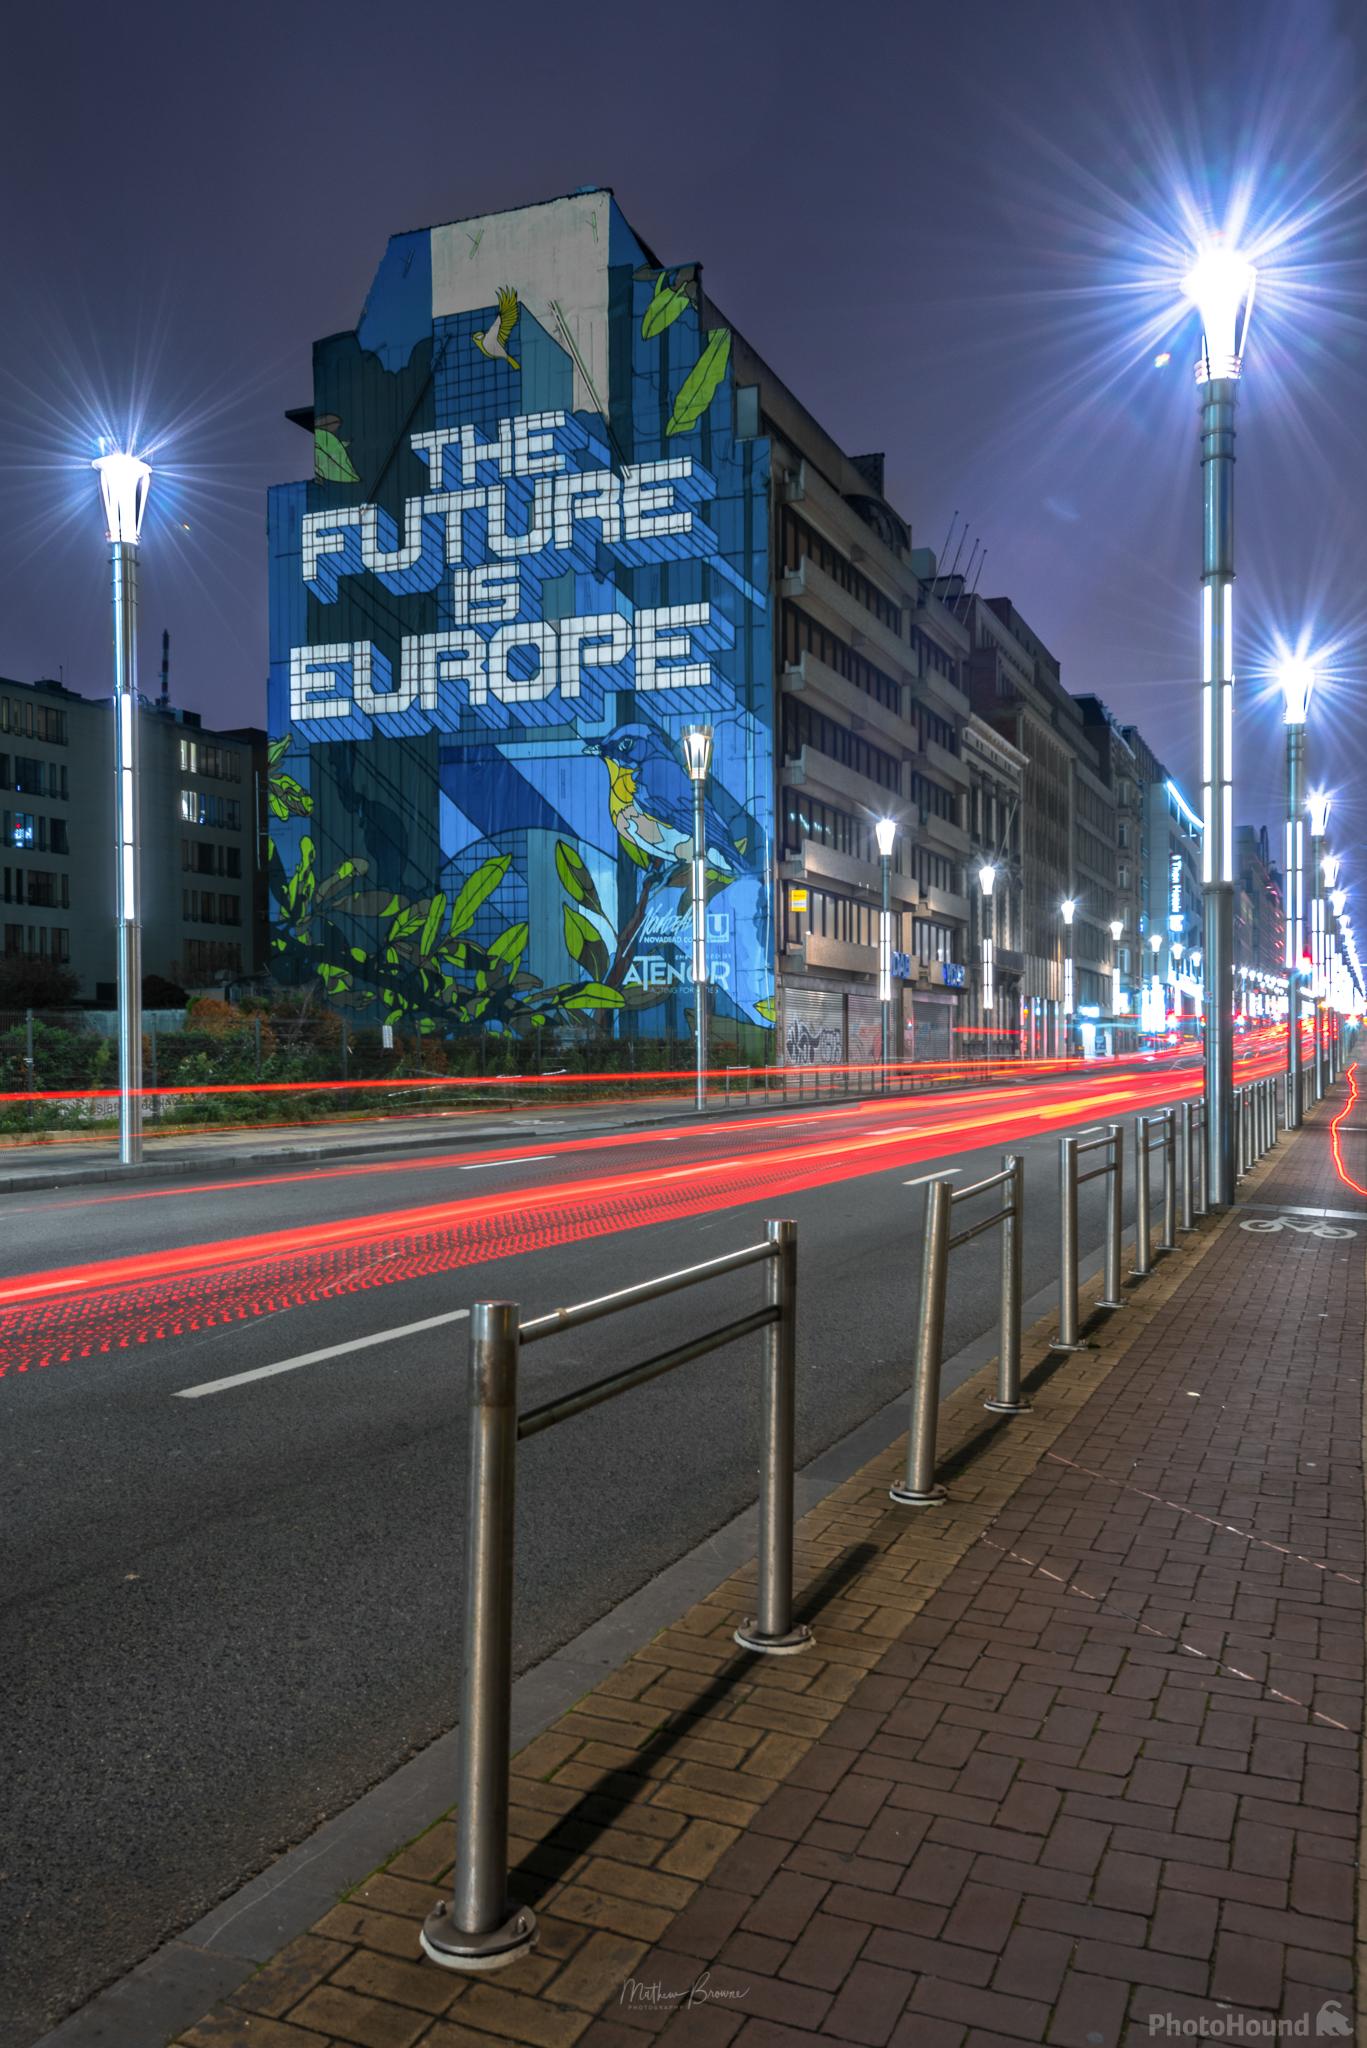 Image of The Future Is Europe - Mural by Mathew Browne